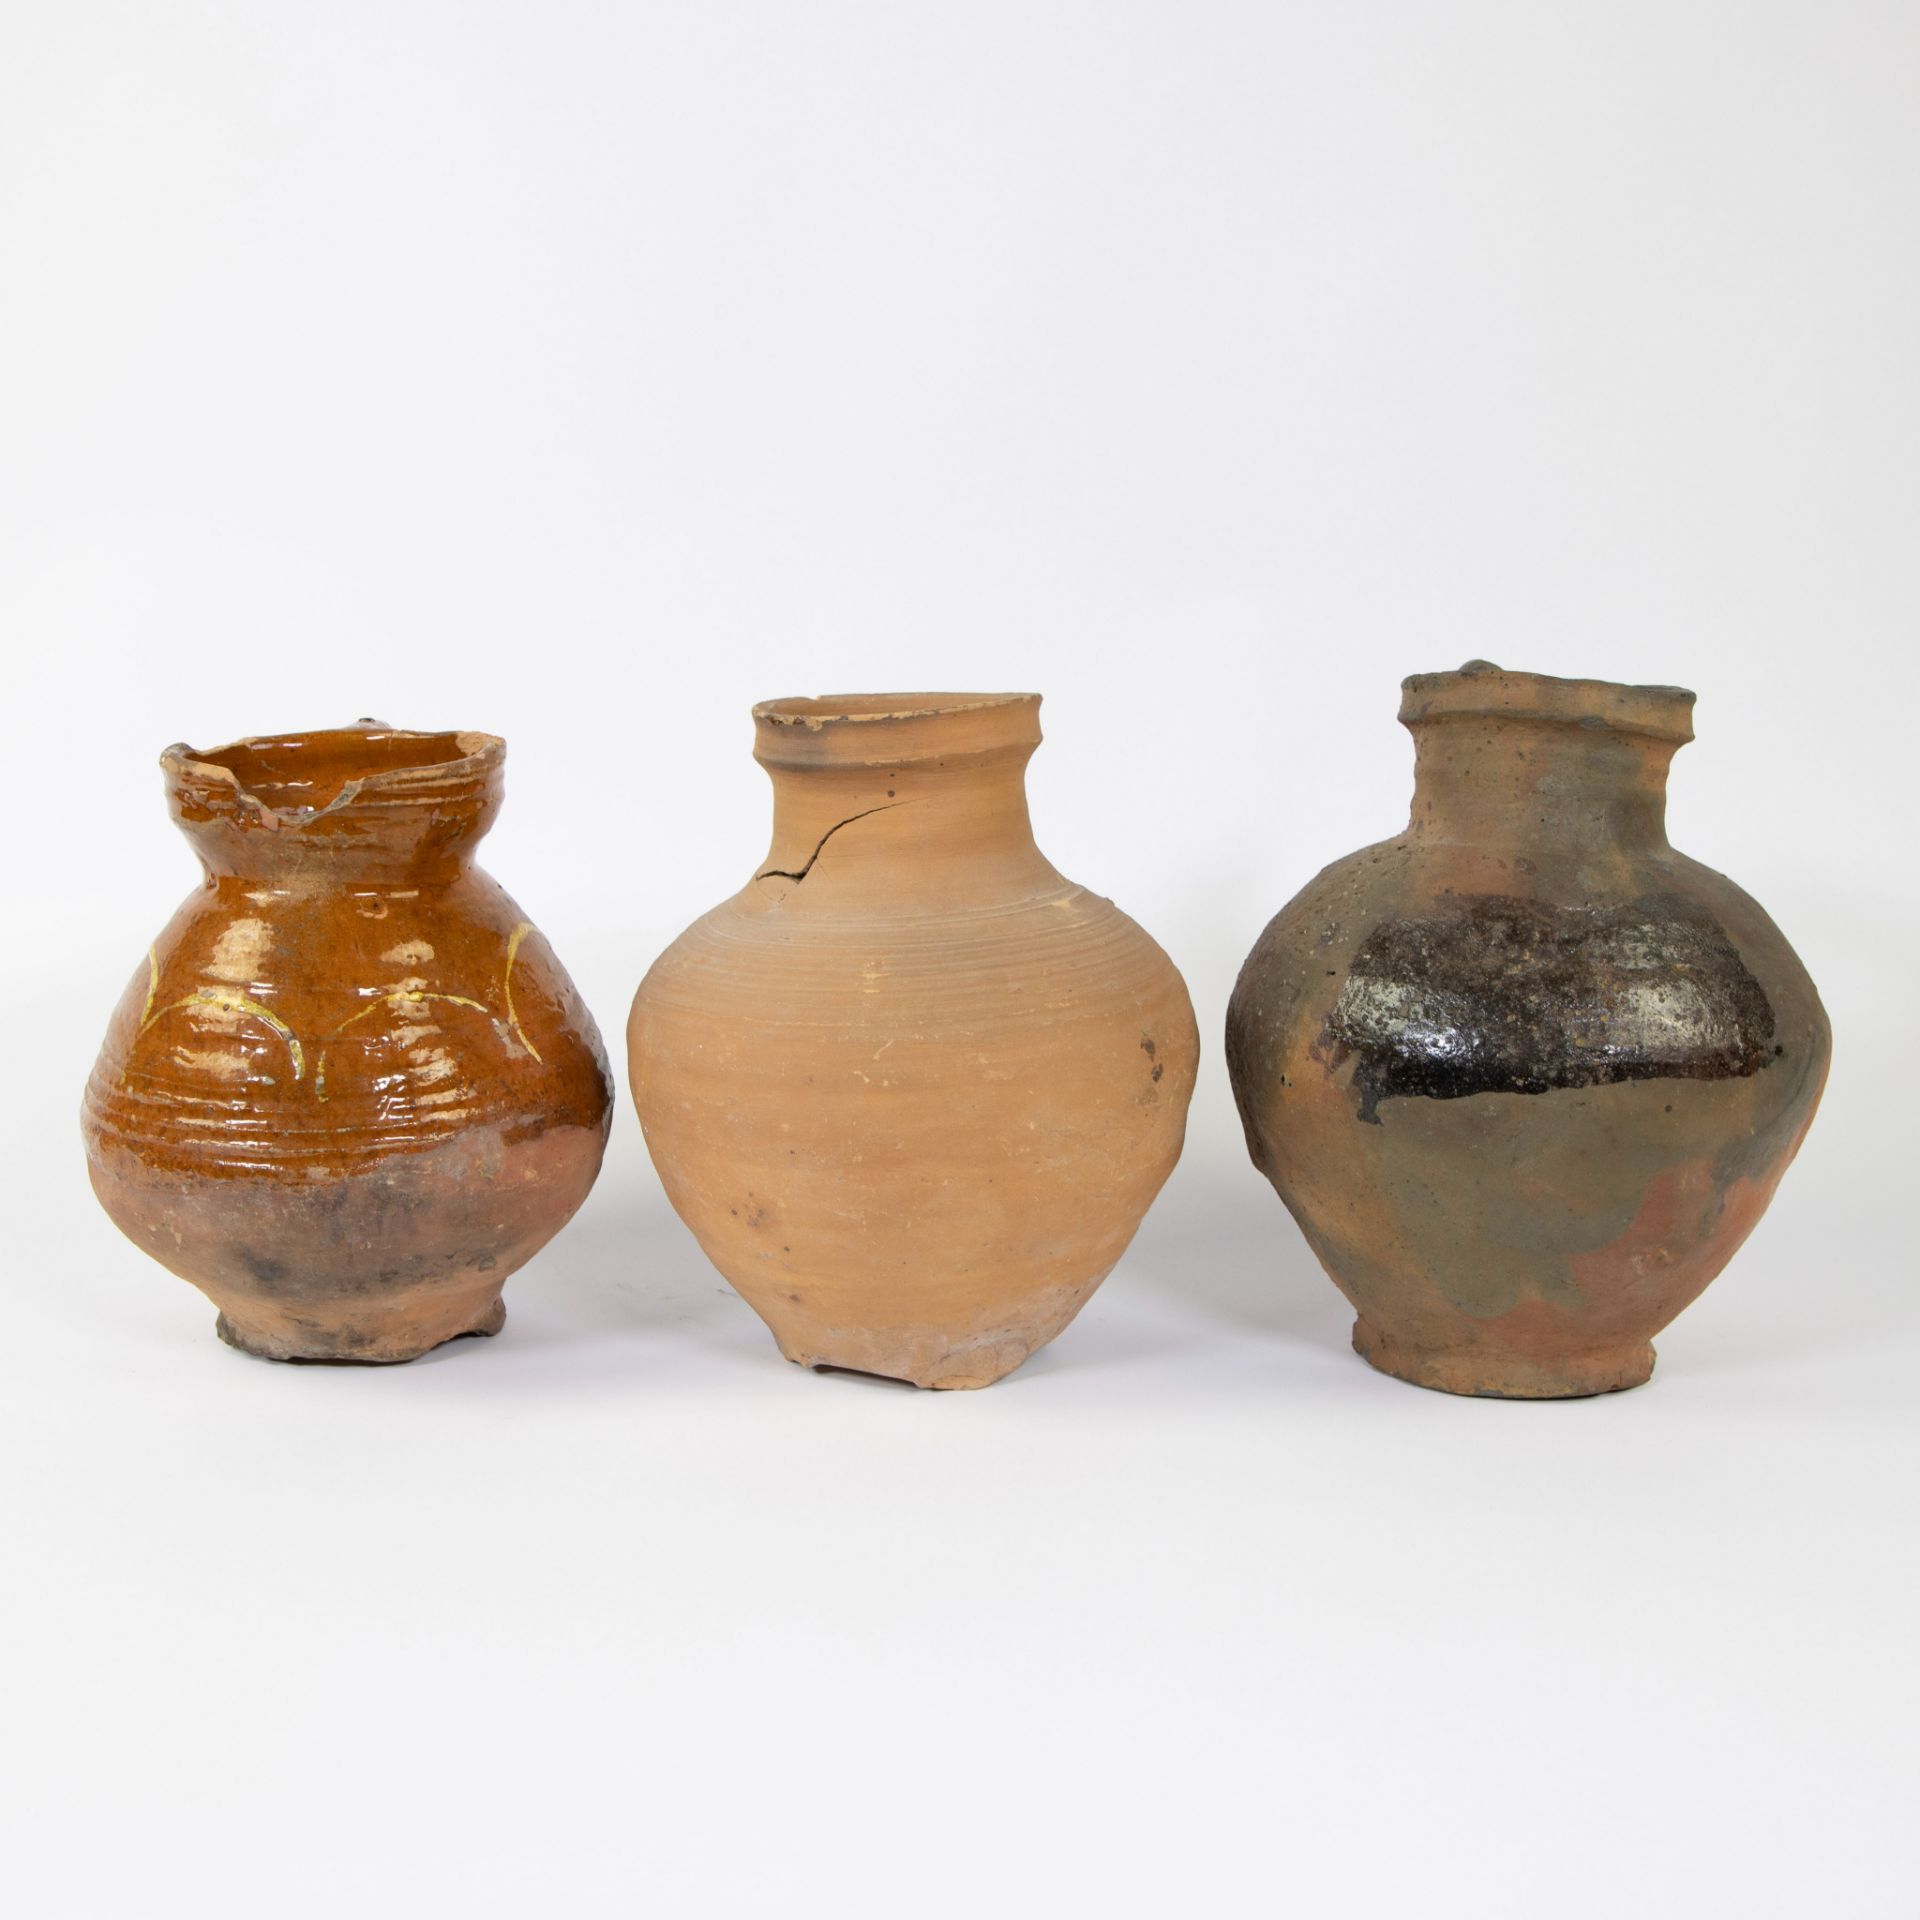 Collection of archaeological pottery, 3 jugs 14th/15th century - Image 4 of 5